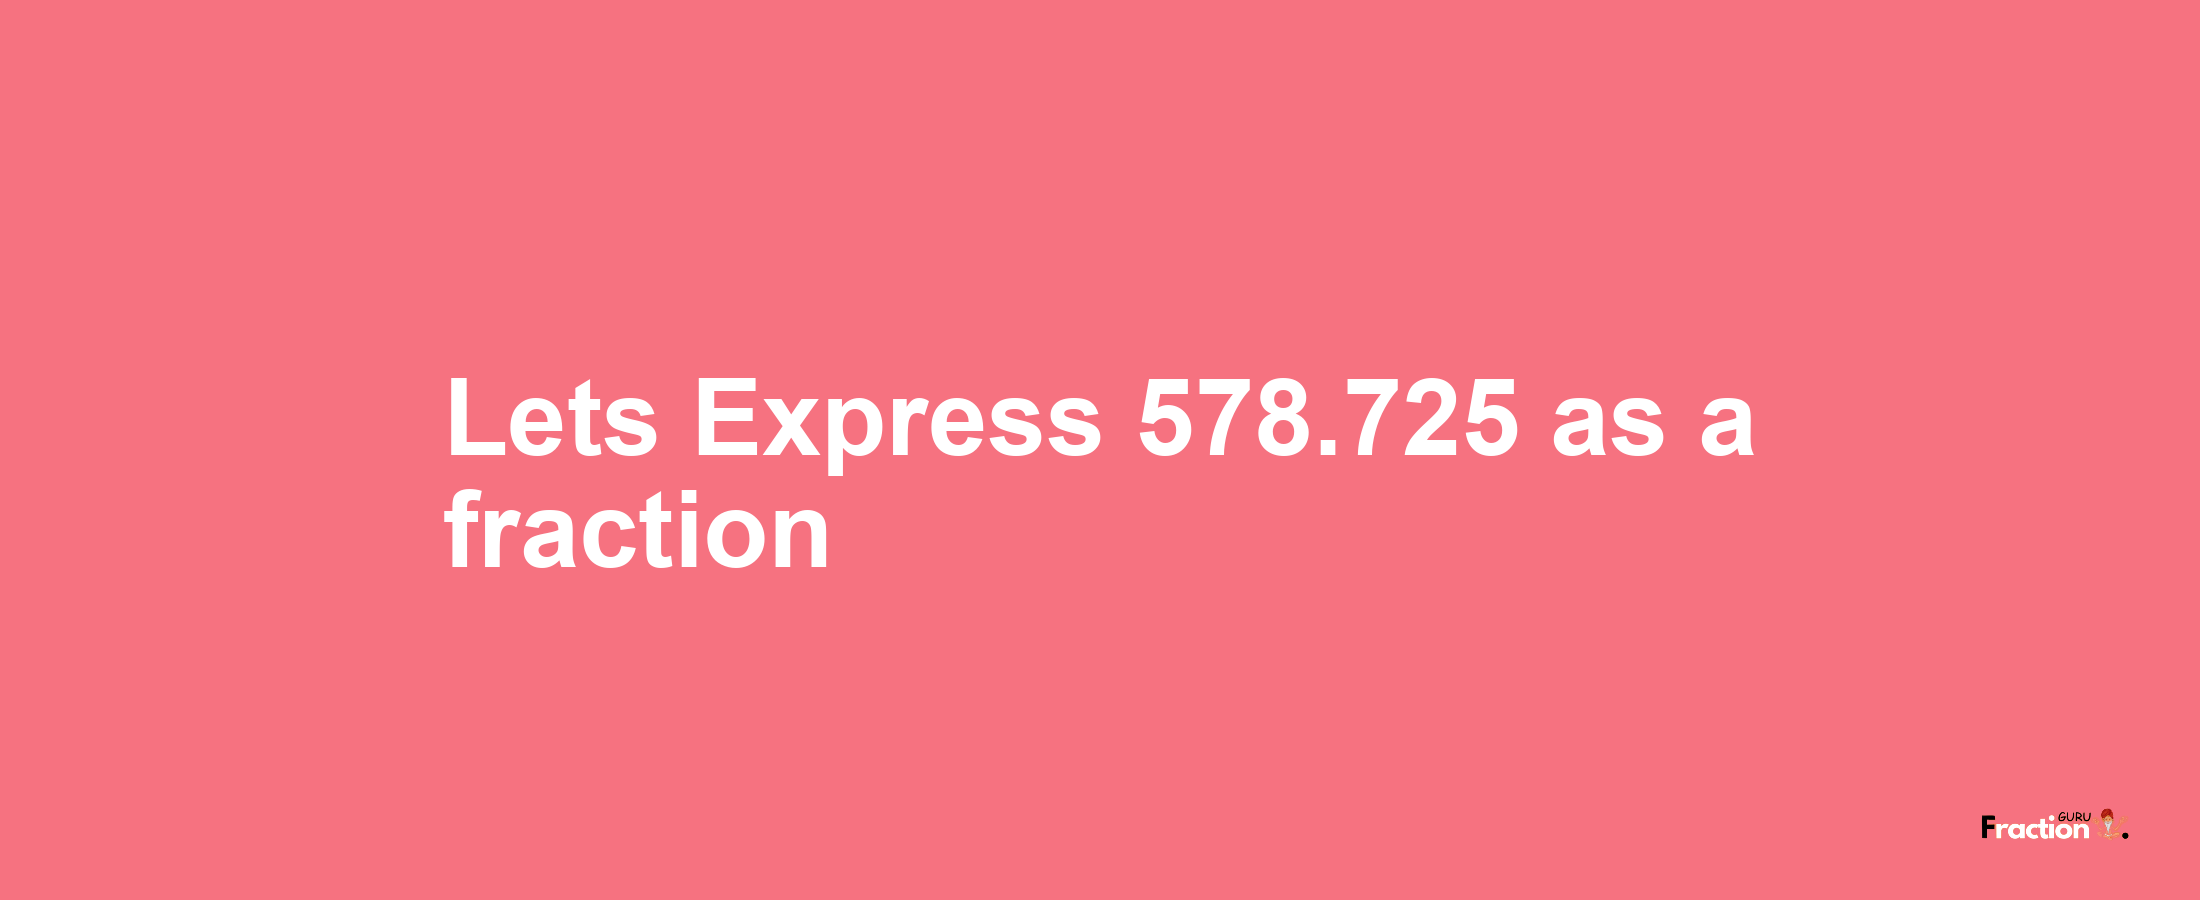 Lets Express 578.725 as afraction